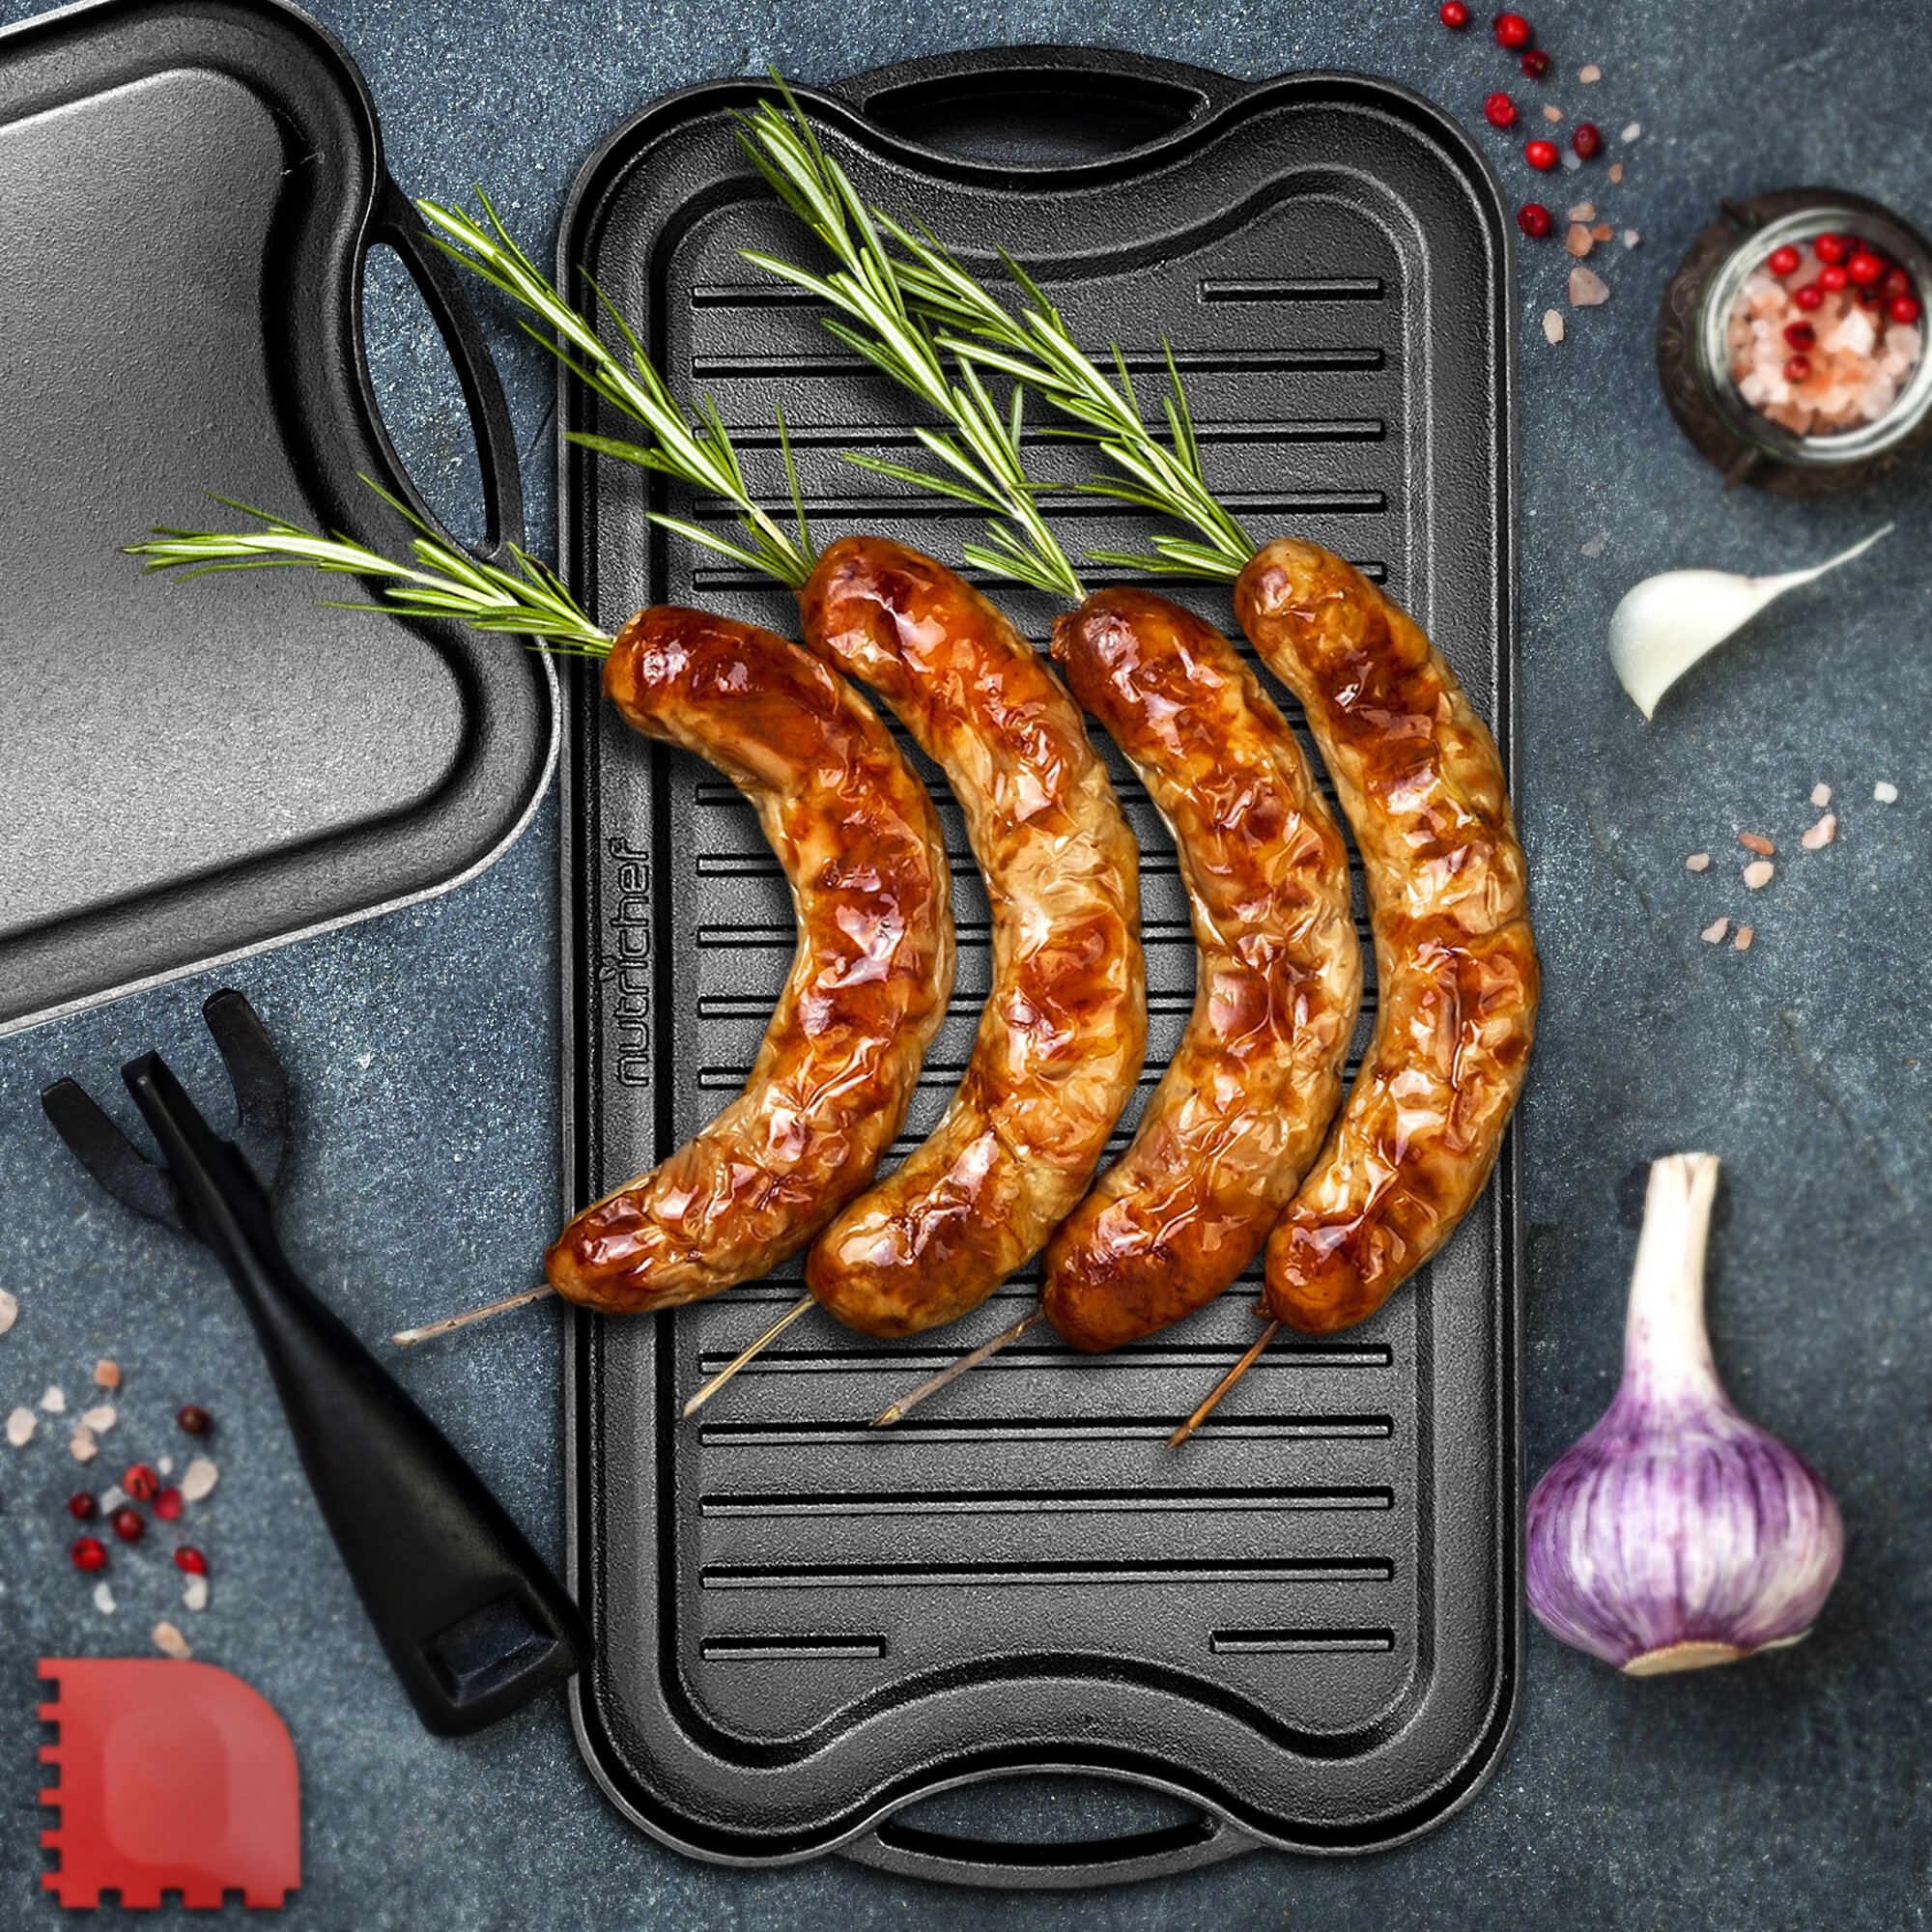 Nutrichef 18 Cast Iron Reversible Grill Plate